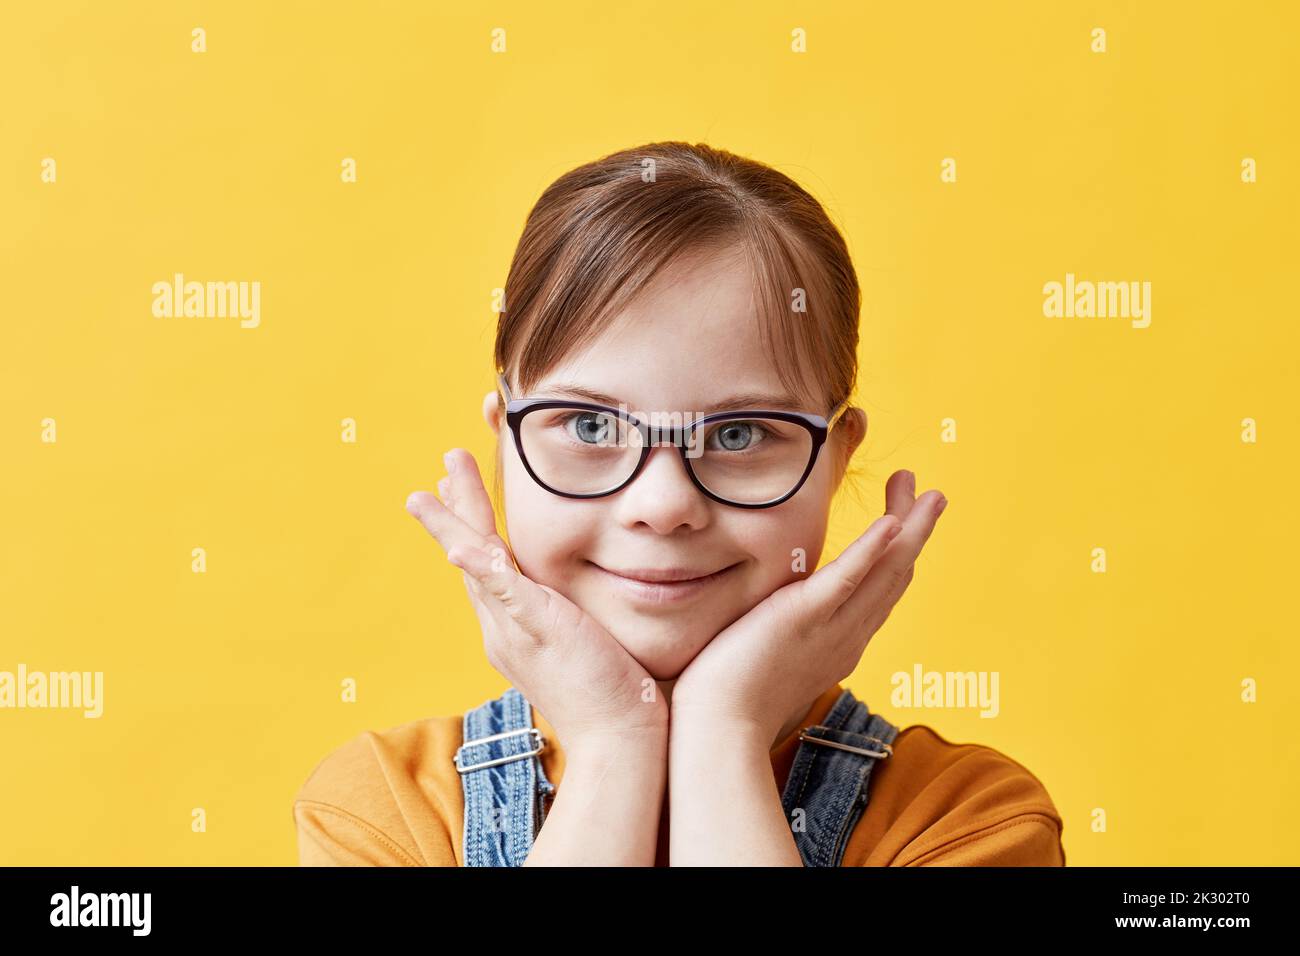 Closeup portrait of cute girl with Down syndrome looking at camera against yellow background in studio Stock Photo